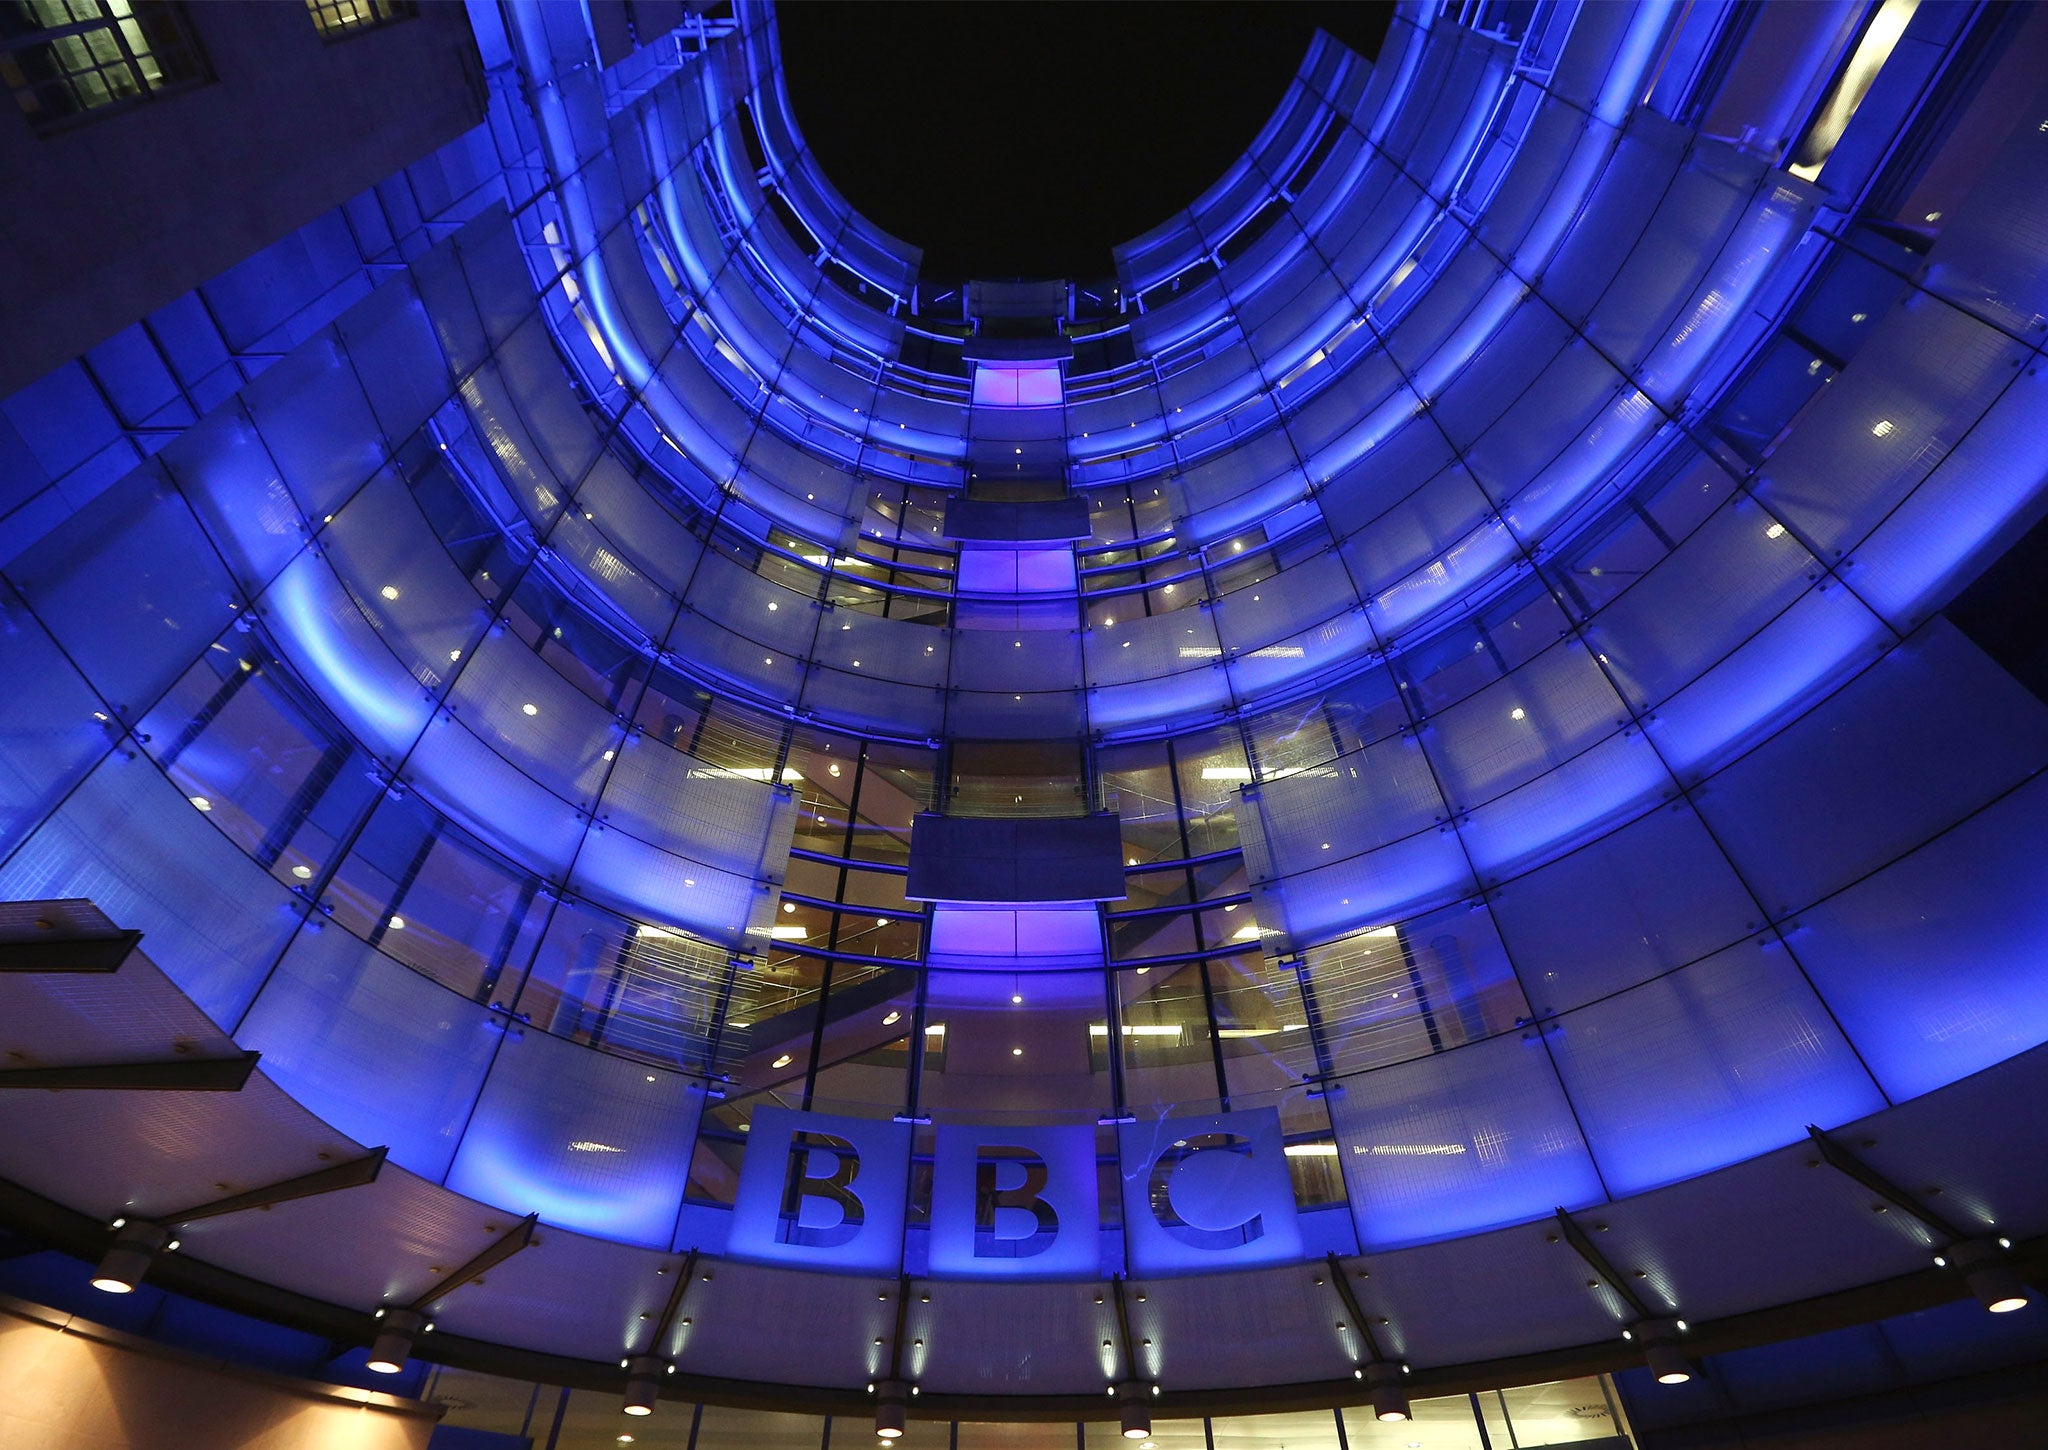 The BBC in particular has a 'greater responsibility' to reflect its audience, the House of Lords Communications Committee said in its report